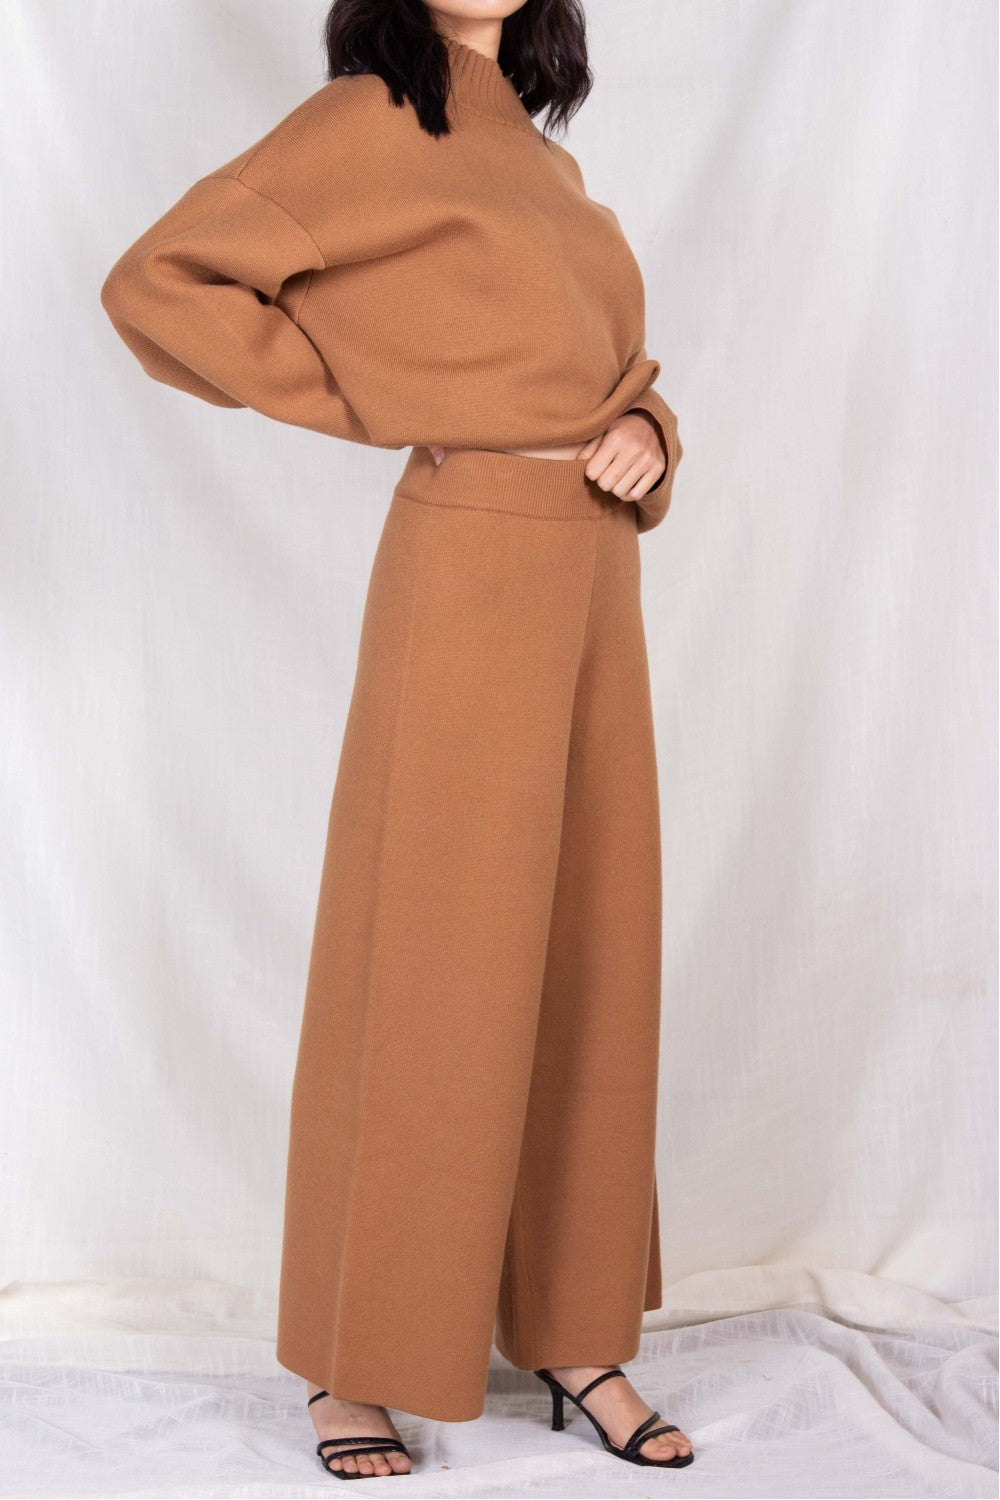 Camel Knit Wide Leg Pants by P. Cill – Catherine Alexandra's